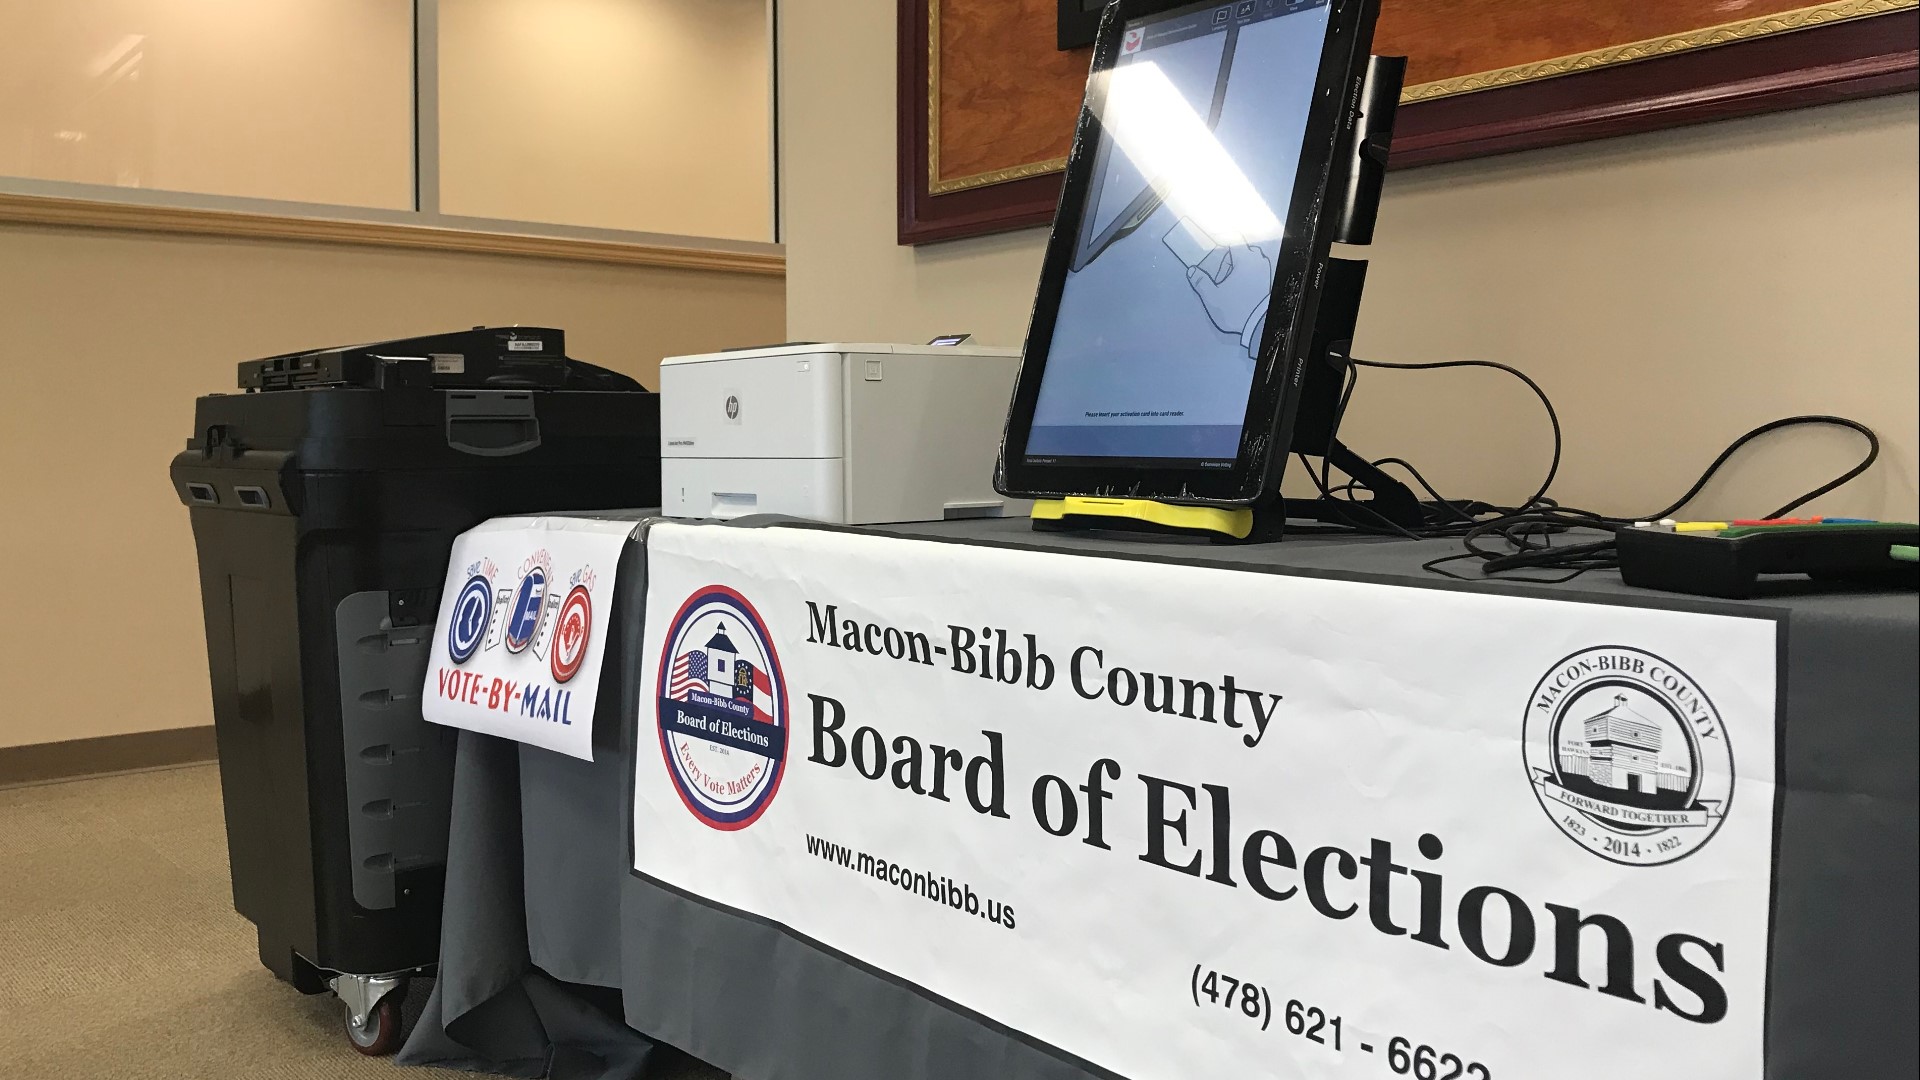 According to the Secretary of State's Office, Georgia counties should have new voting machines by February. The new system uses touchscreens and ballot printouts.